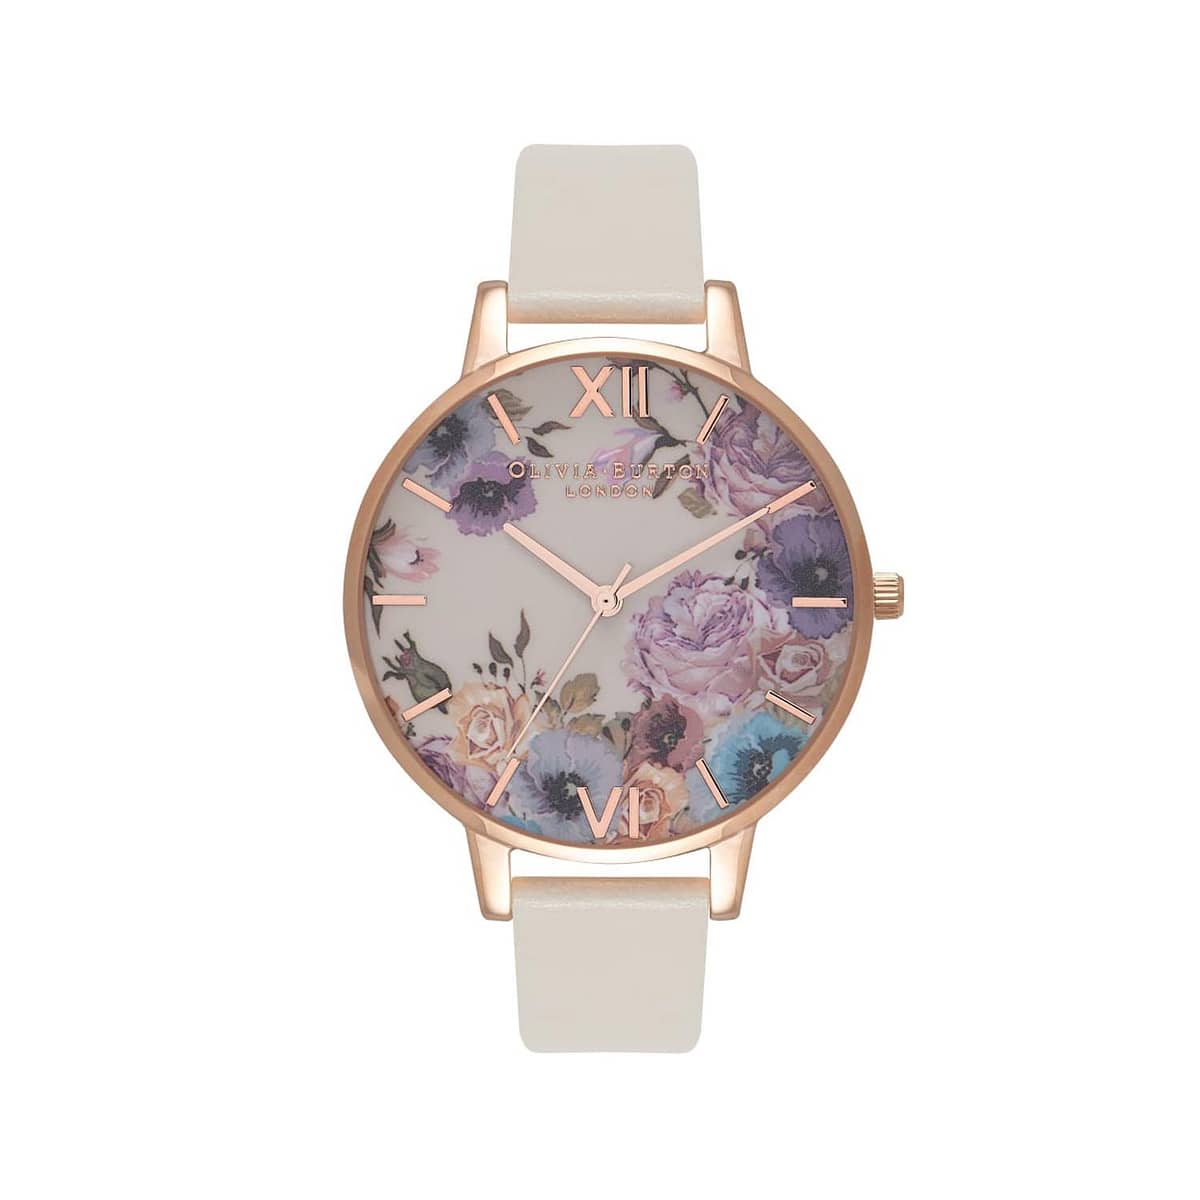 Olivia Burton Enchanted Garden 38mm Rose Quartz Watch with Nude Strap and Floral Dial